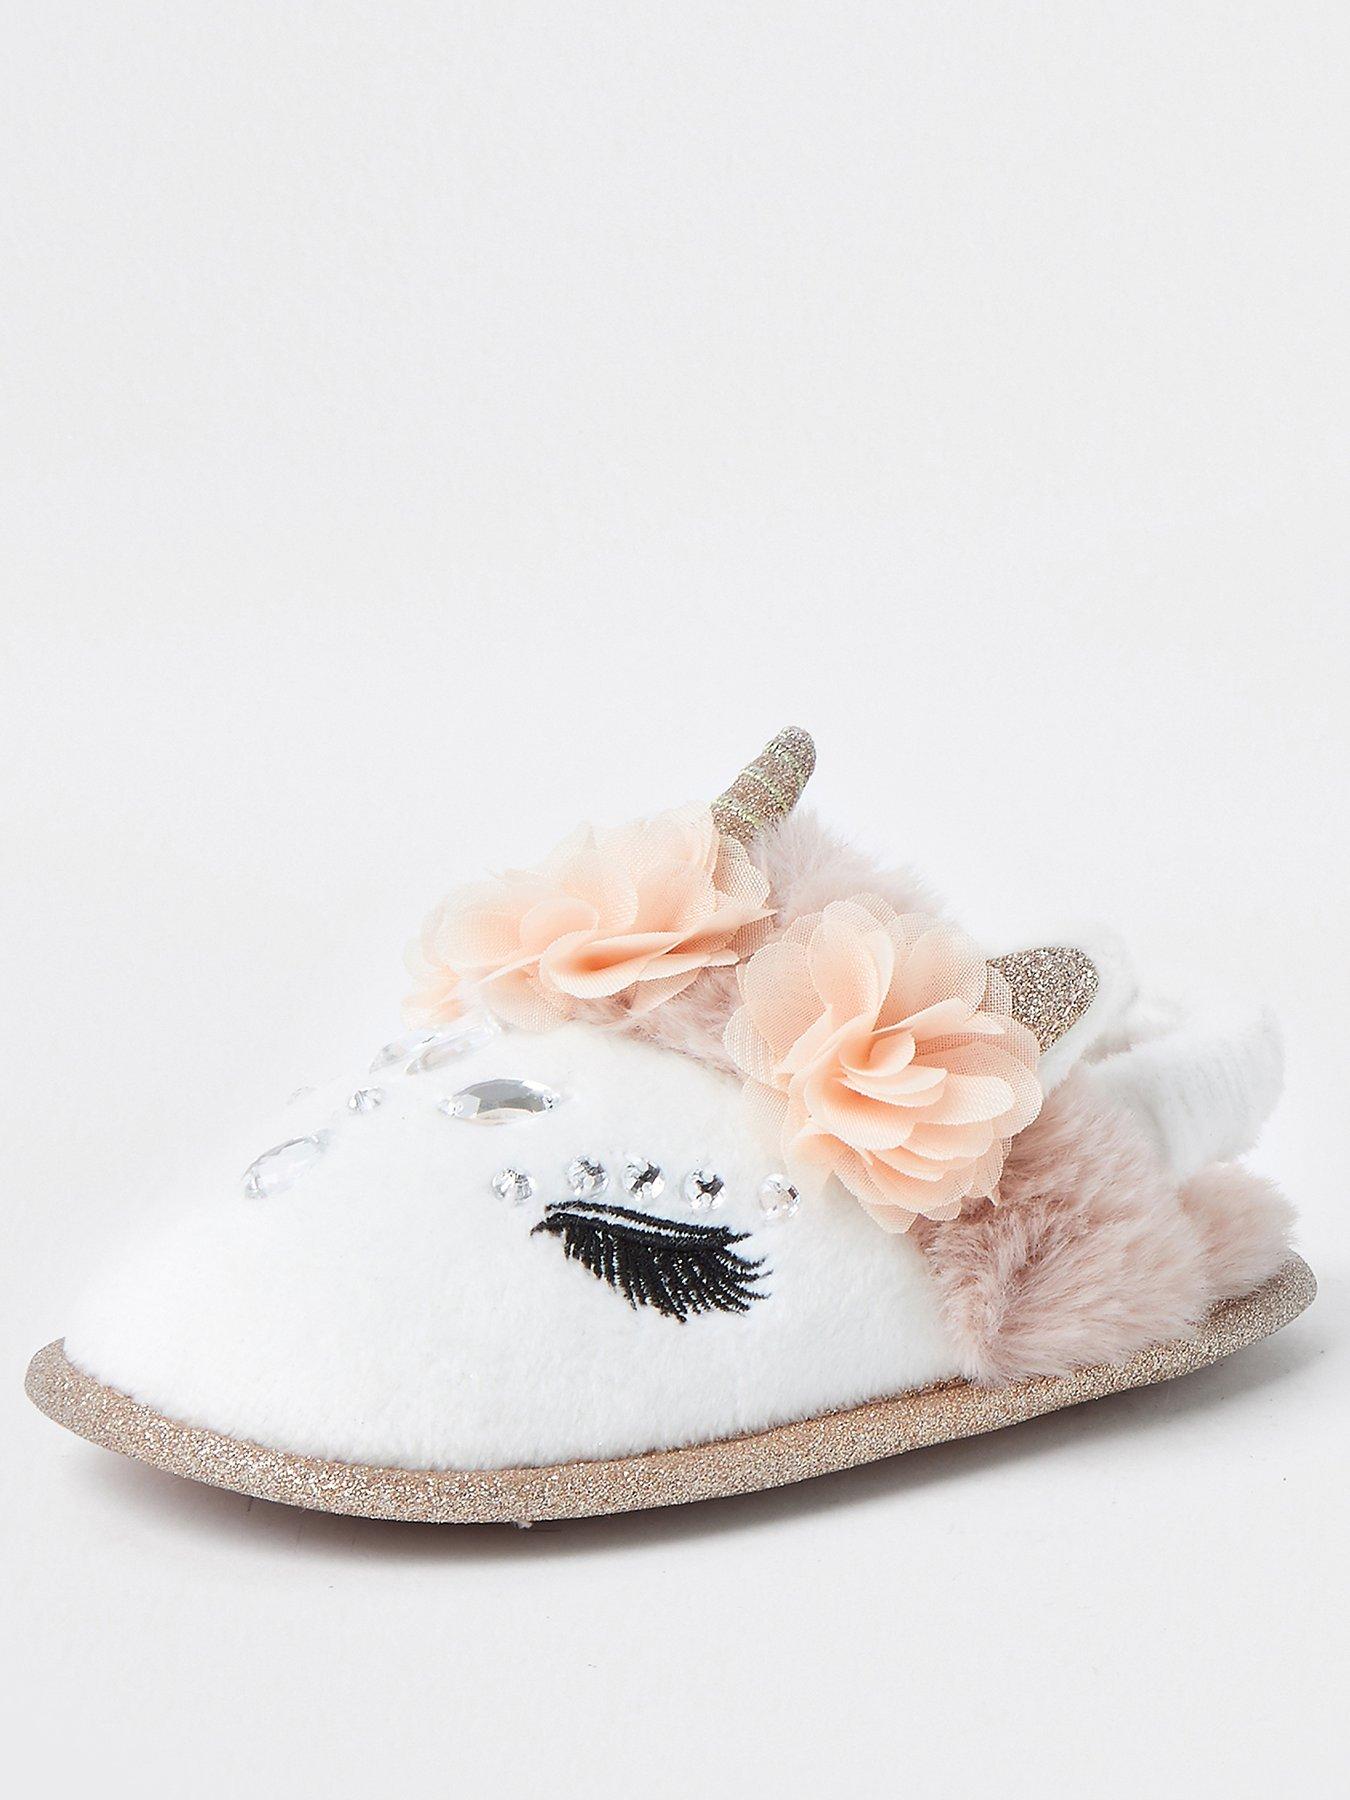 river island pink slippers